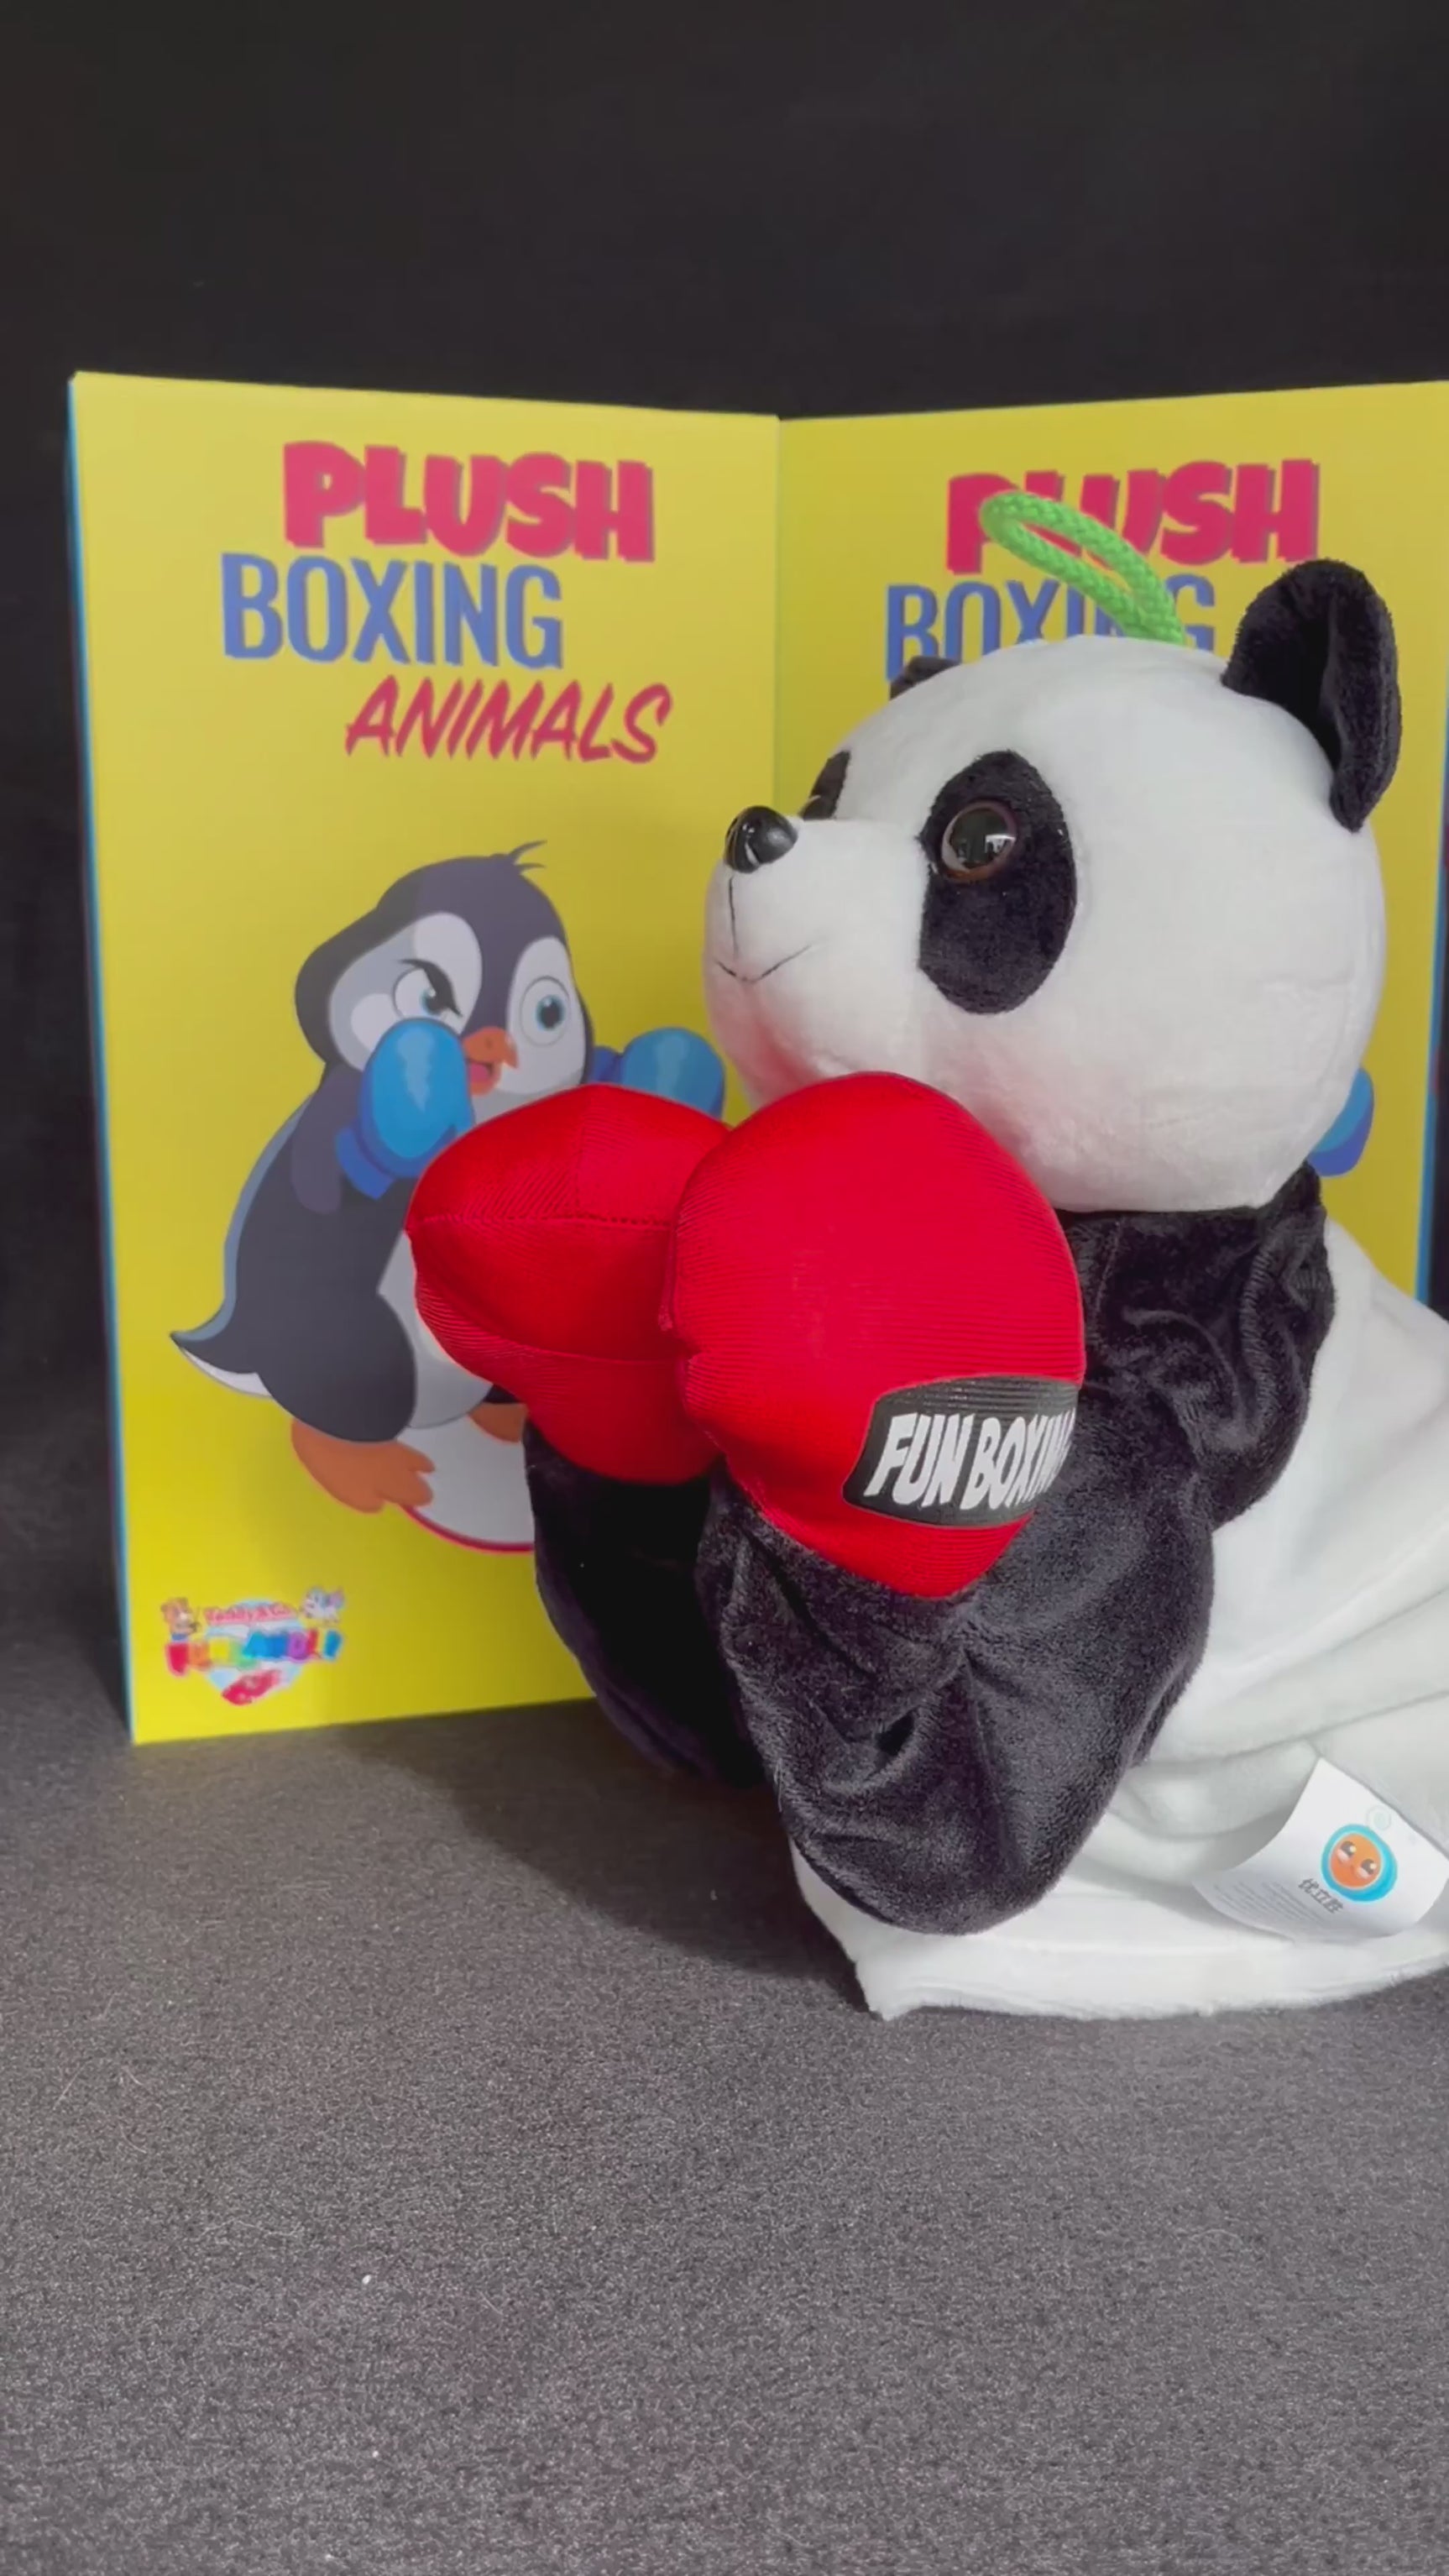 Watch the Plush Animal Boxing Toy in action as it throws punches, demonstrating the toy's boxing movements and interactive play features.